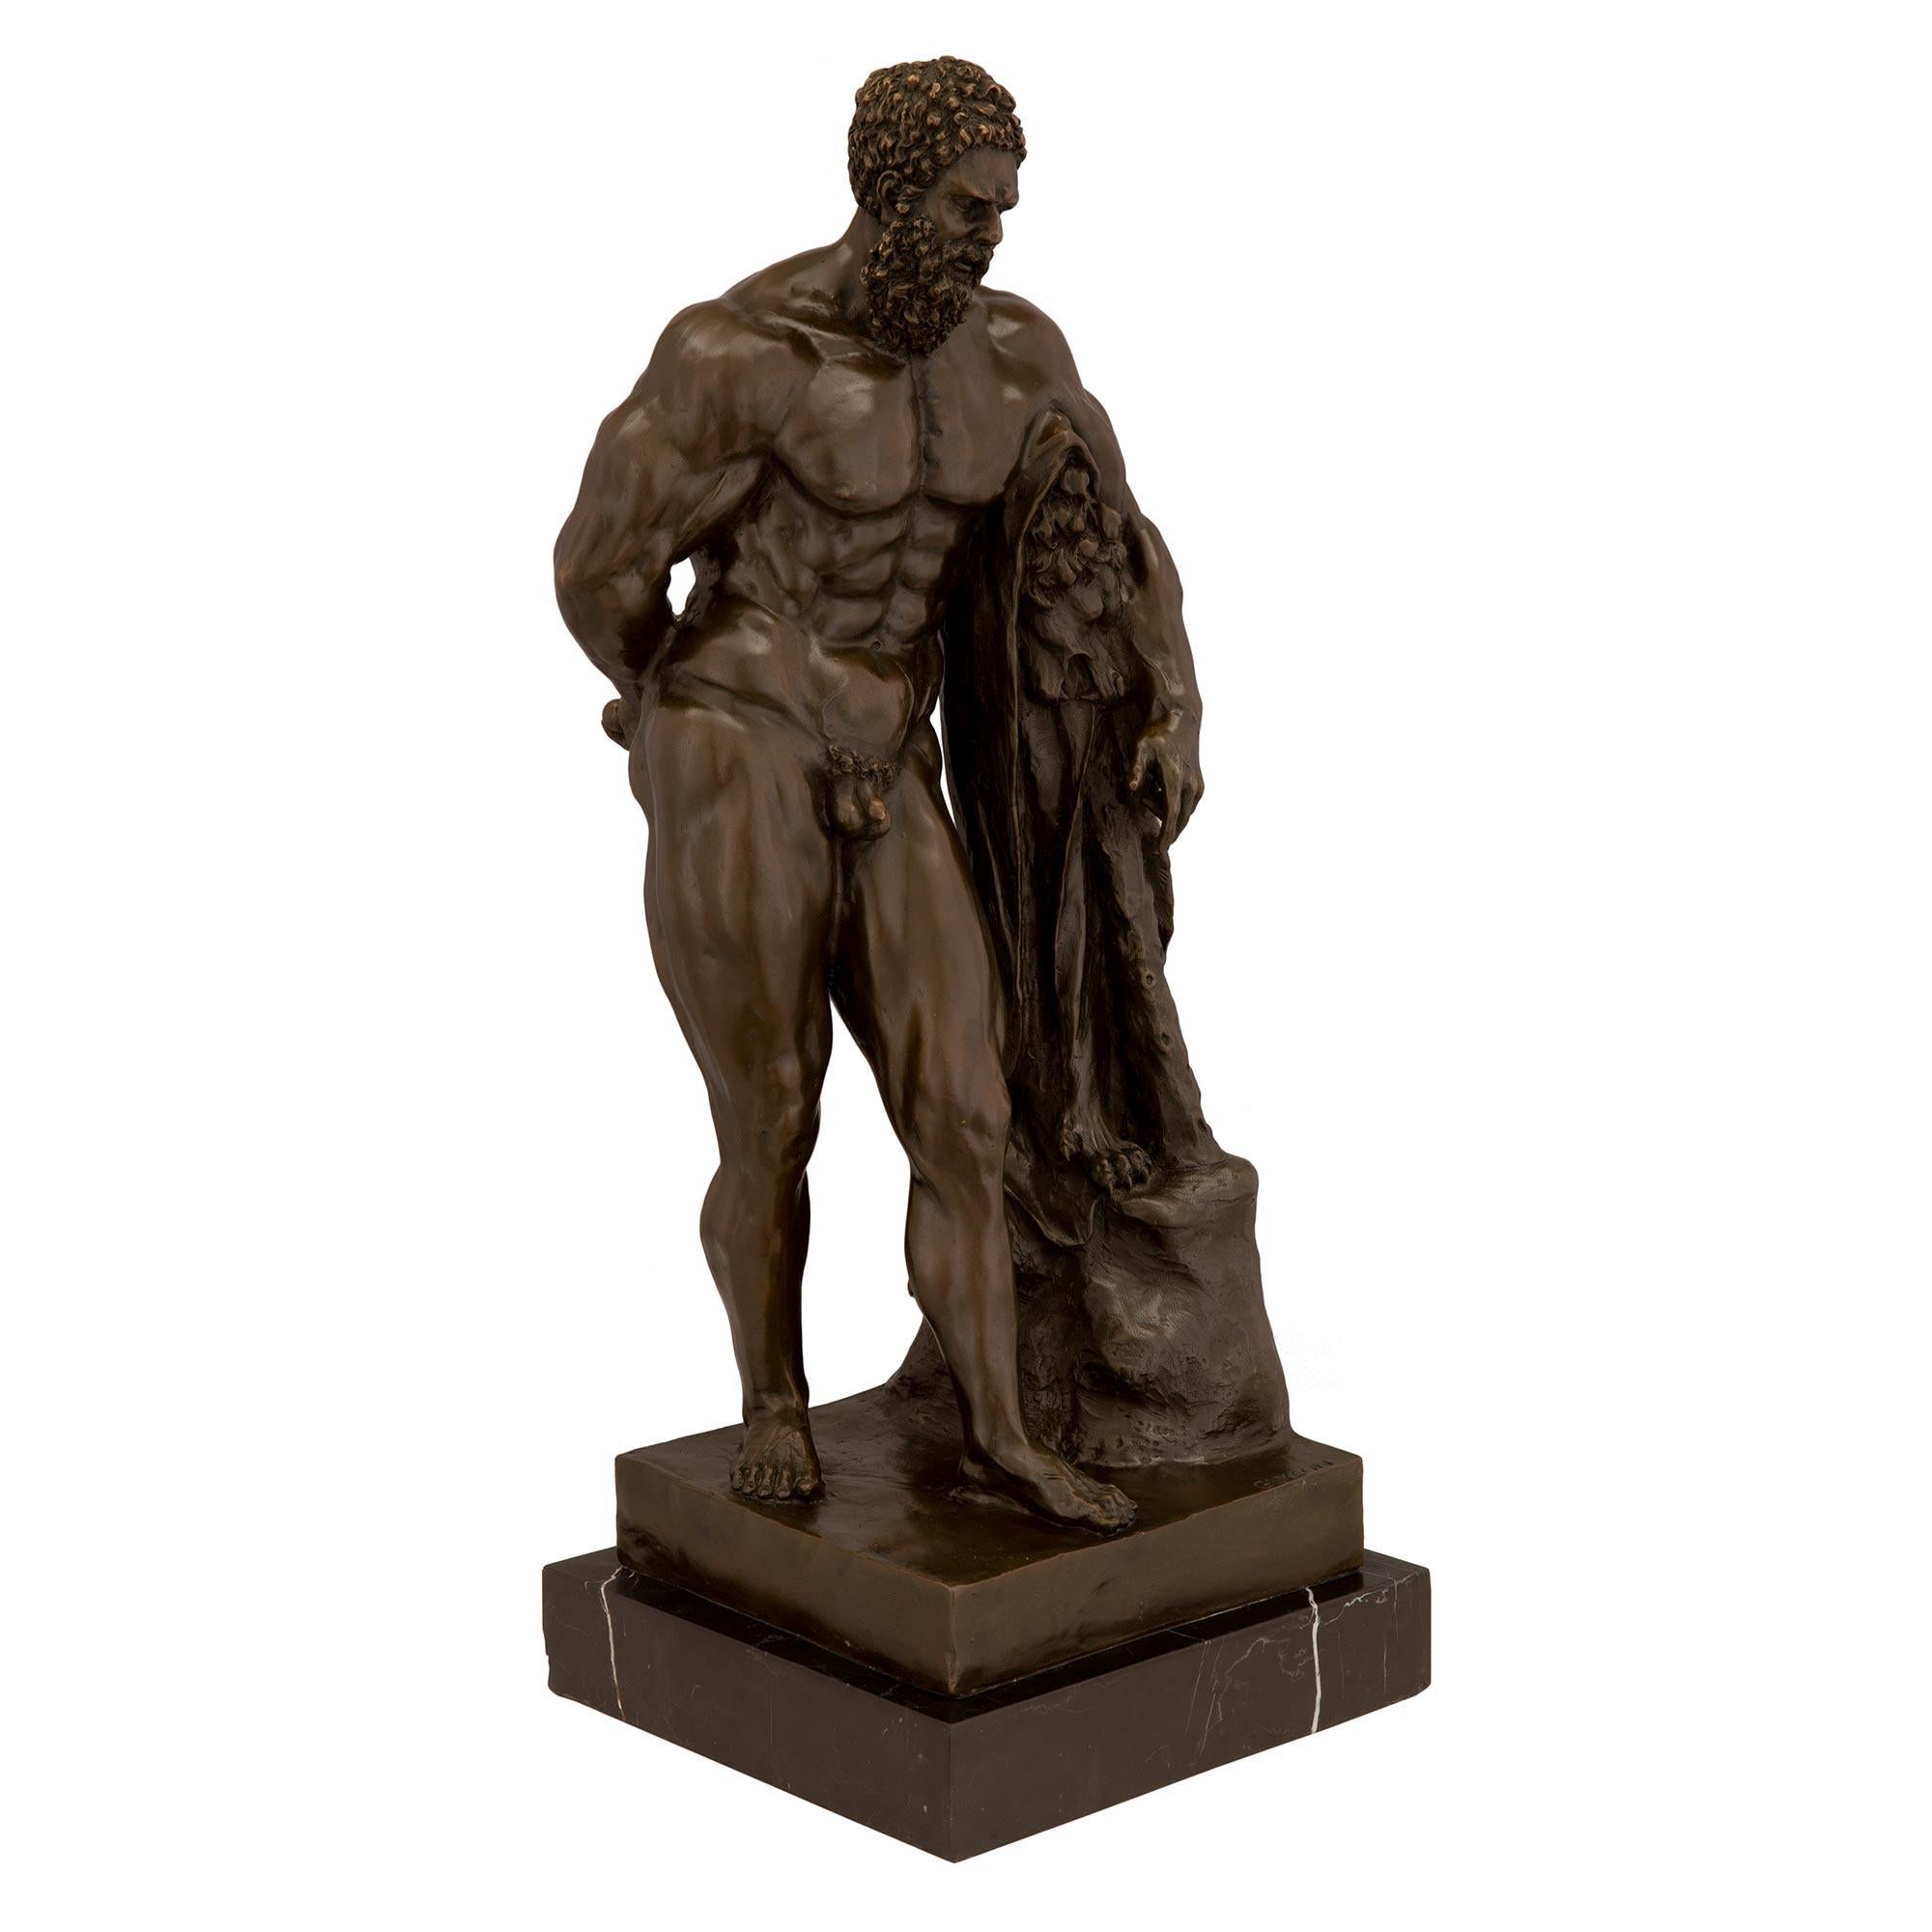 An impressive patinated bronze statue of Hercules. The statue is raised by a square Black Antique marble base. Above is the handsome patinated bronze Hercules leaning on what is likely the skin of the Nemean lion he was tasked to kill by the king.